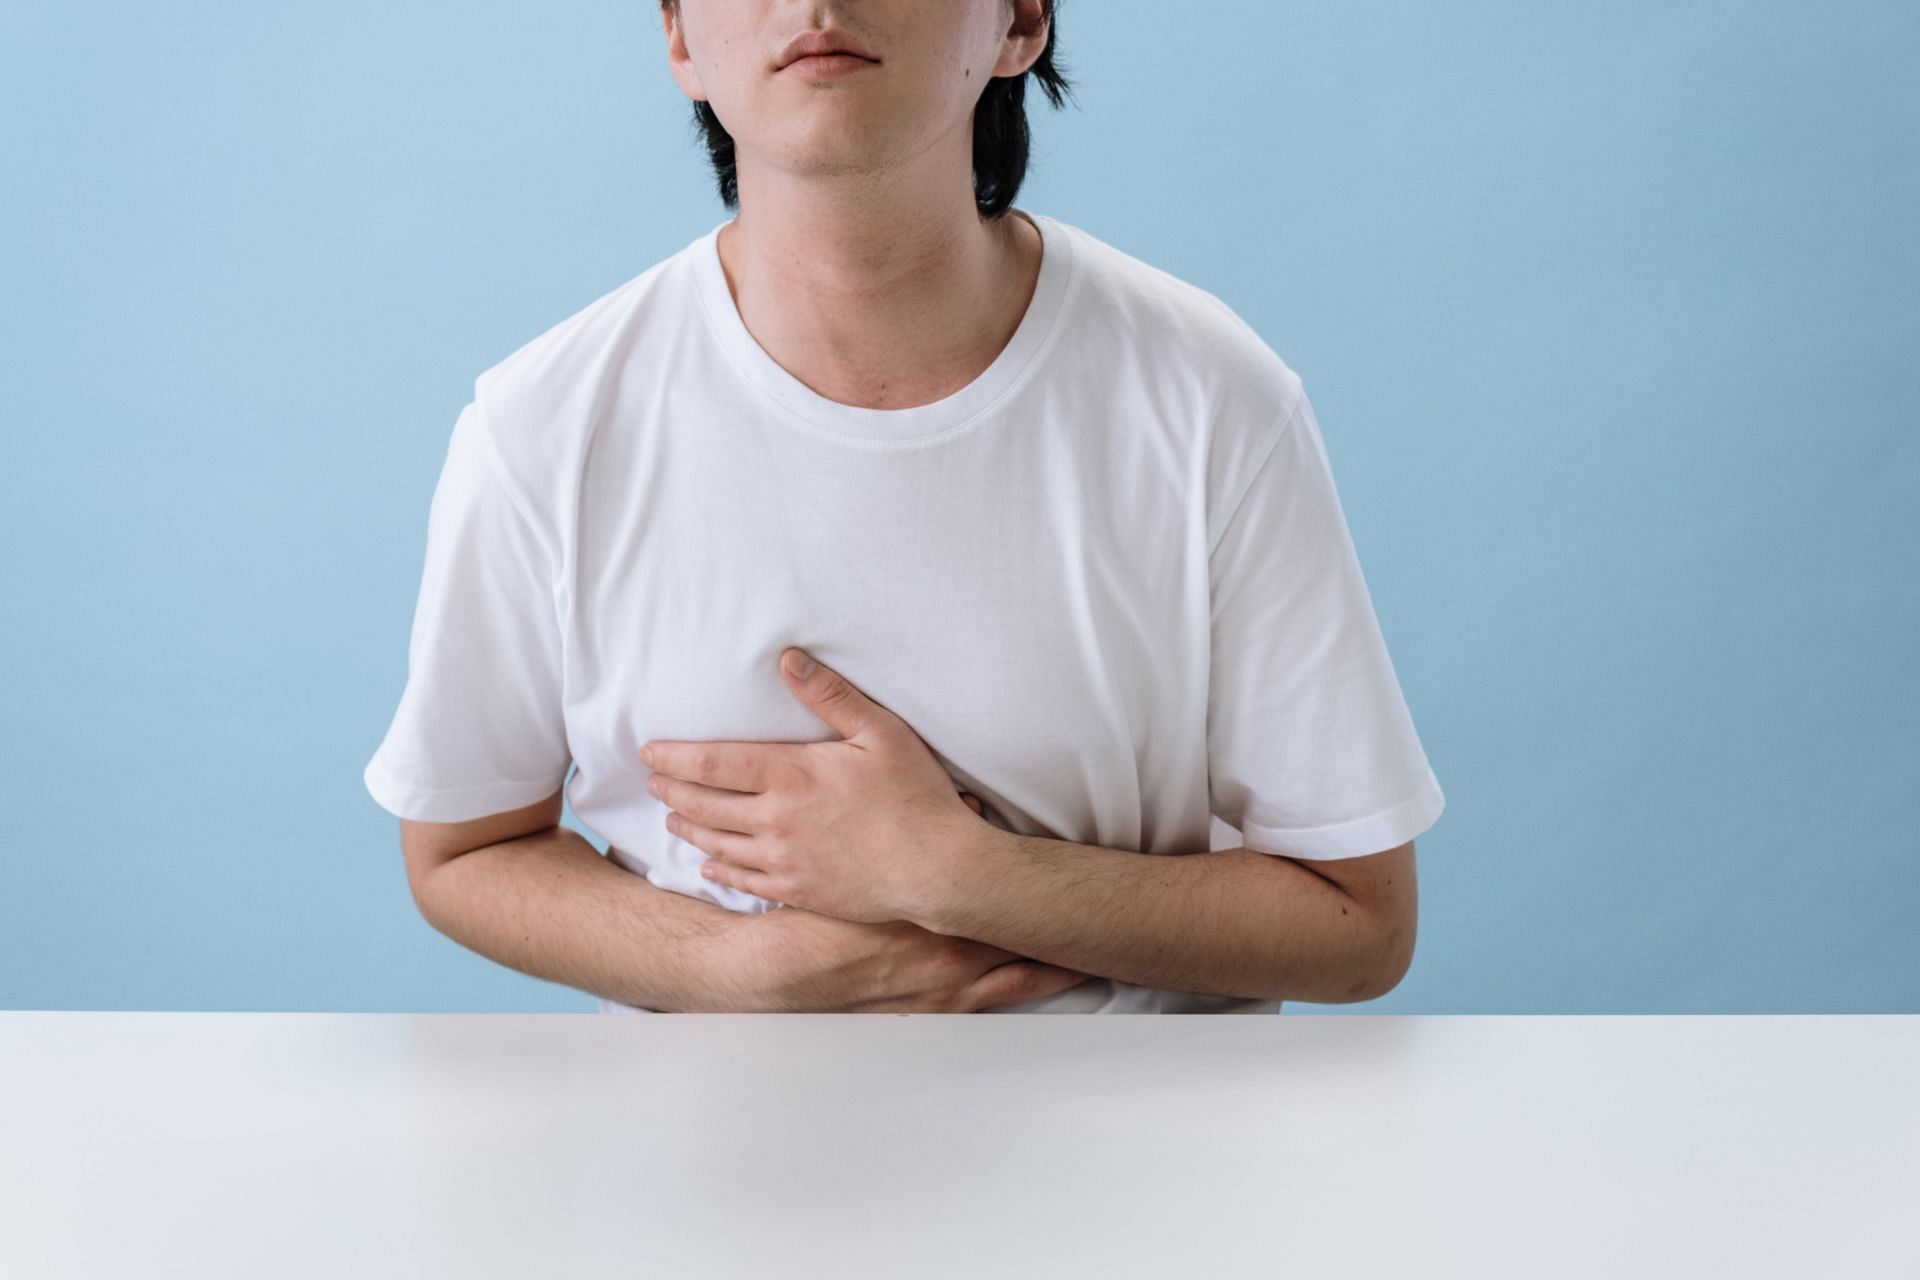 Stomach cramps among Side-effects of Melatonin (Image sourced via Pexels / Photo by cottonbro)